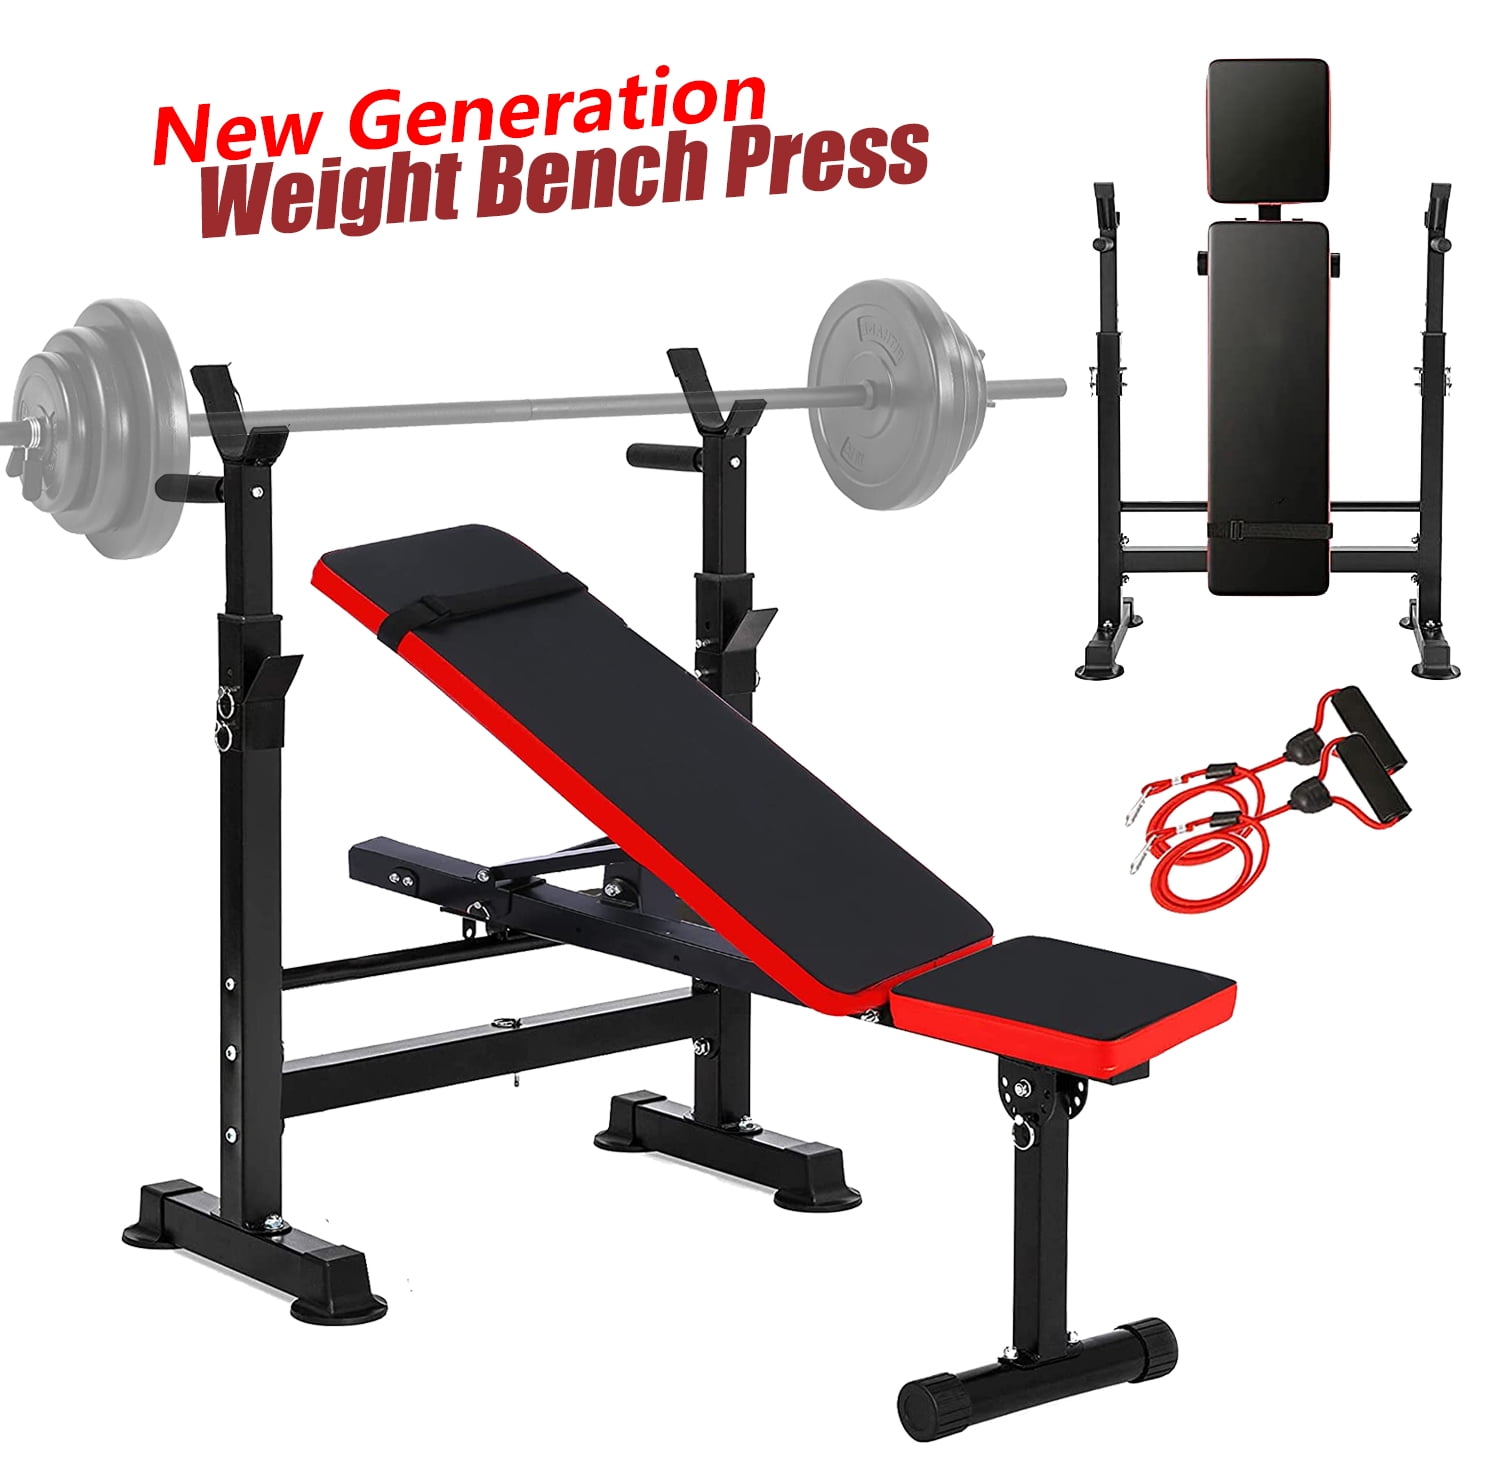 Adjustable Weight Bench Lifting Incline Foldable Full Body Workout Gym Fitness 